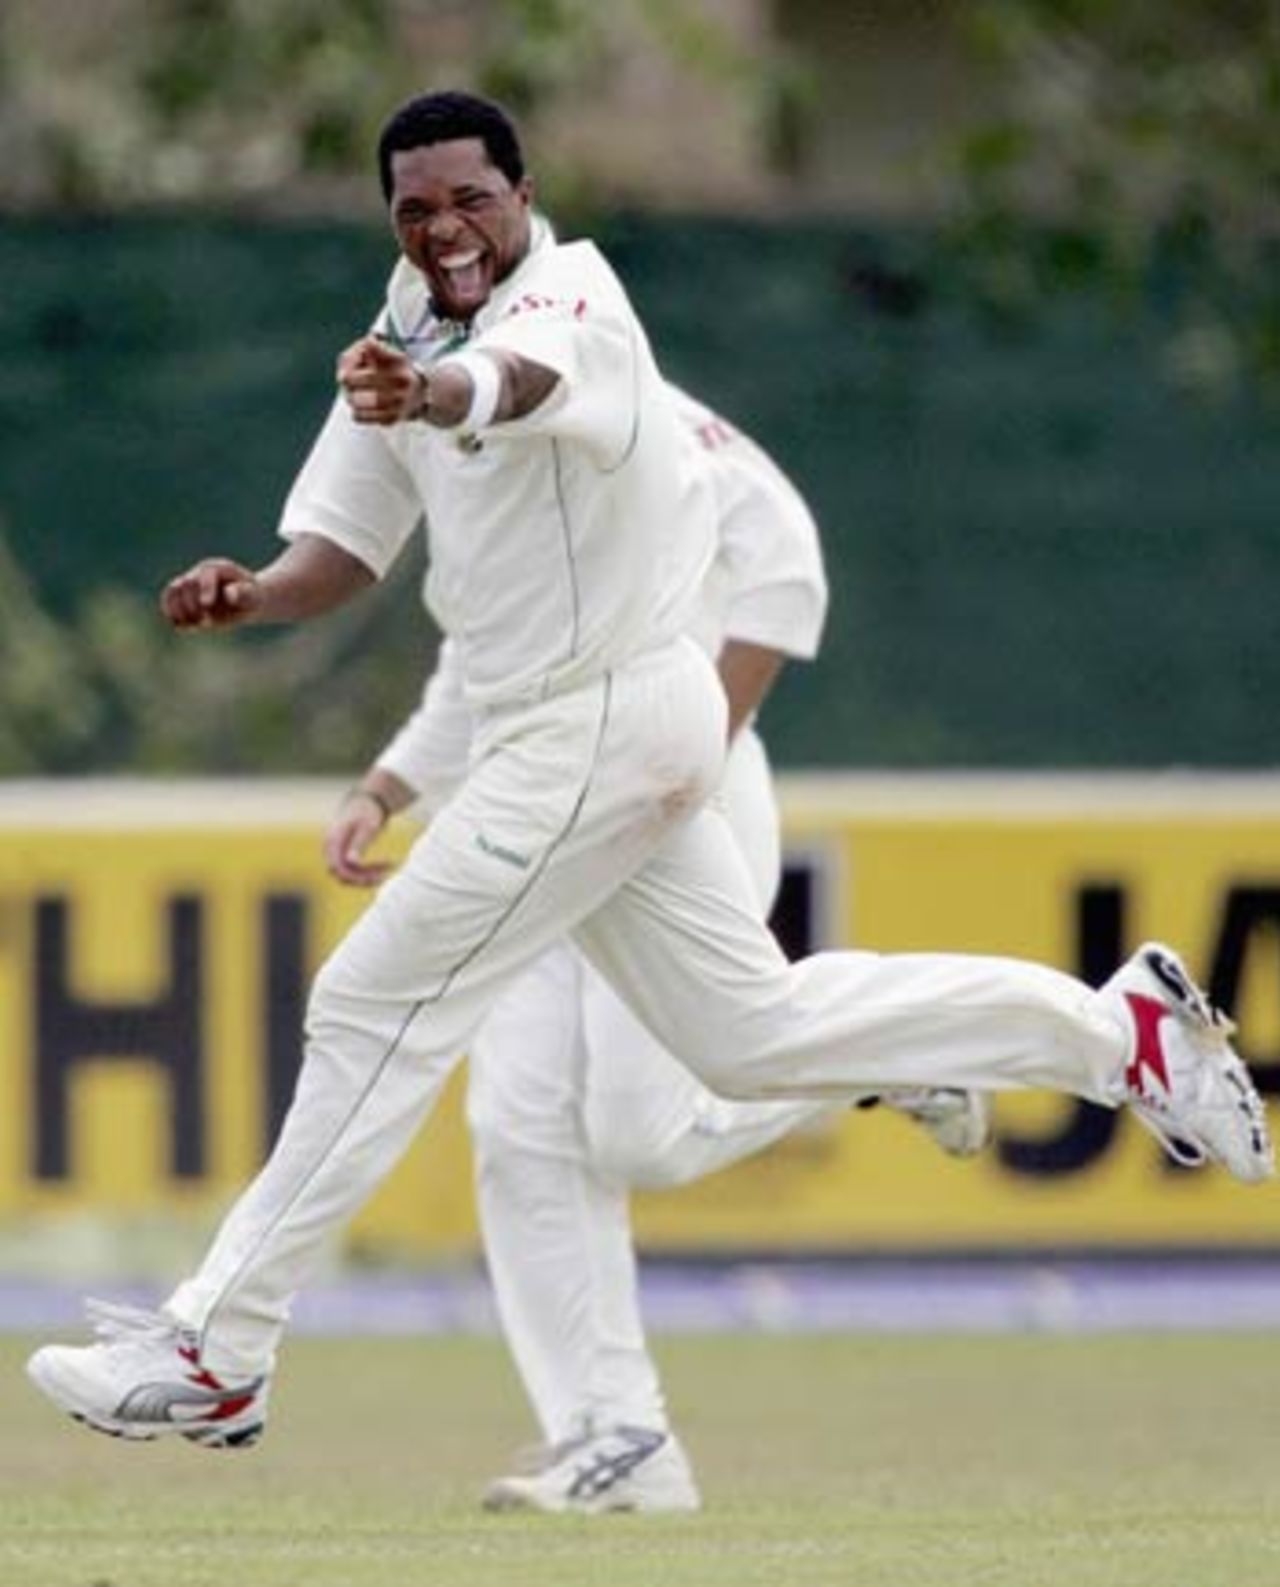 Makhaya Ntini celebrates picking up a wicket against Sri Lanka in the second Test at Colombo, South Africa v Sri Lanka, 2nd Test, August 5, 2006